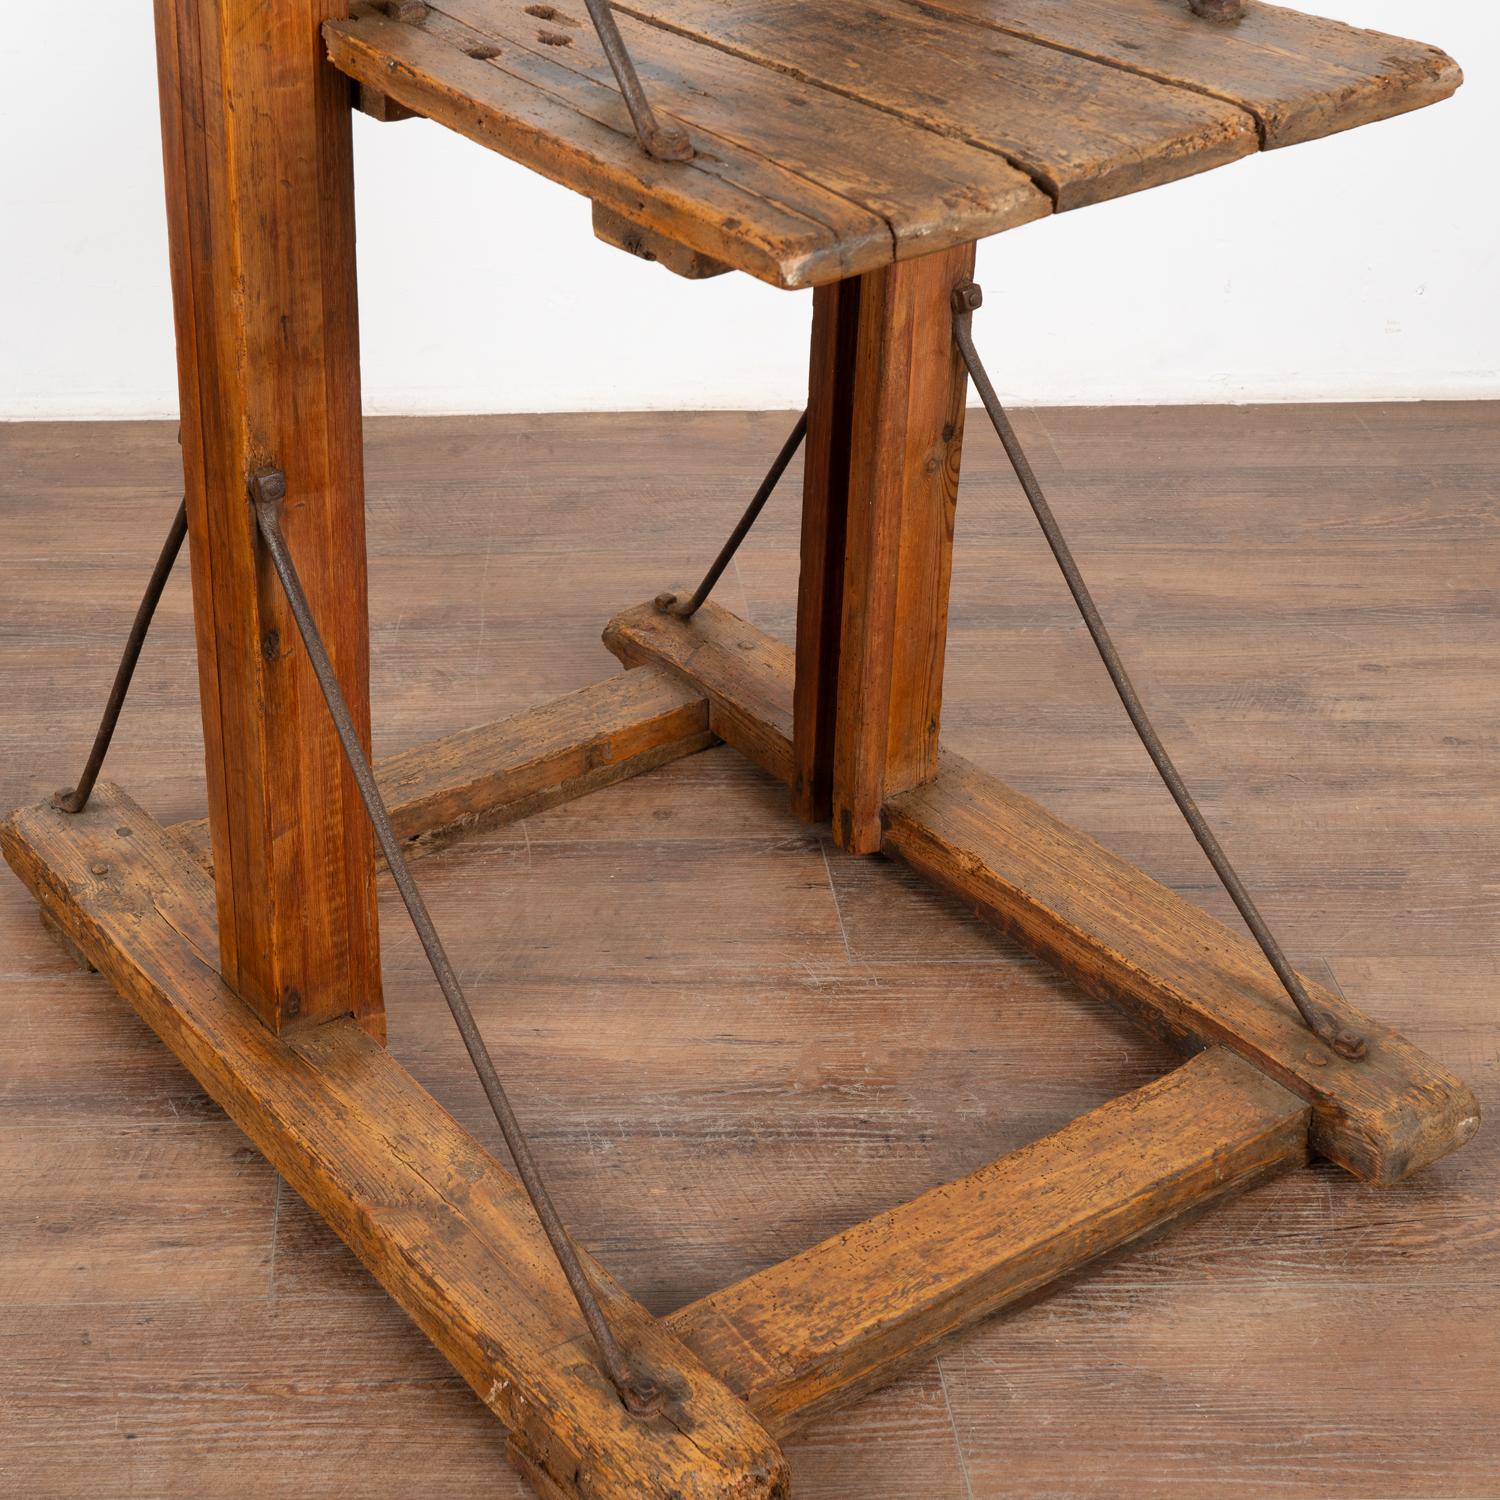 Antique Grain Lift Rustic Display Table, Denmark circa 1900 In Good Condition For Sale In Round Top, TX